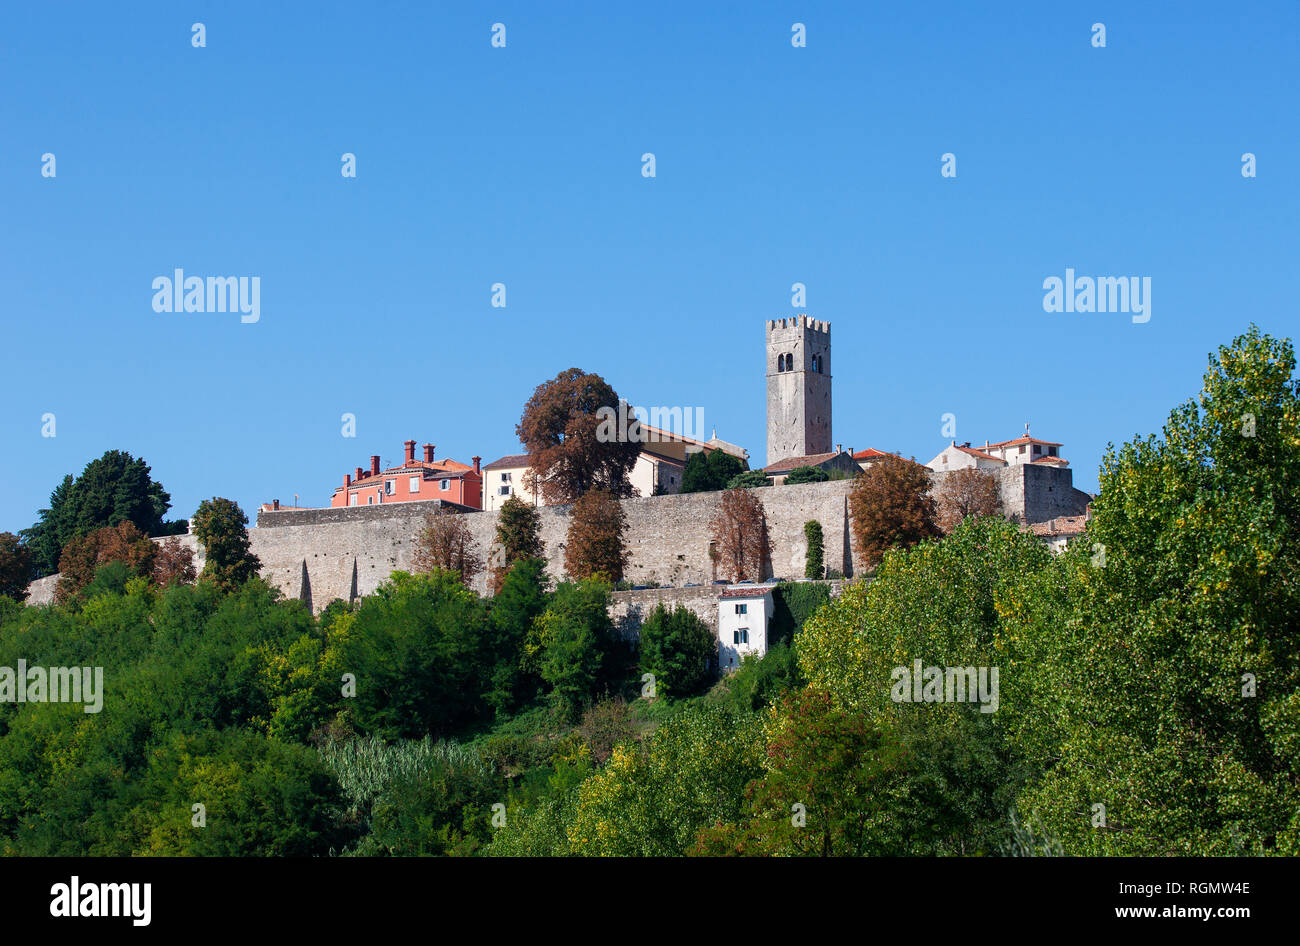 Croatia, Istria, Motovun, Old town, city wall and defence tower Stock Photo